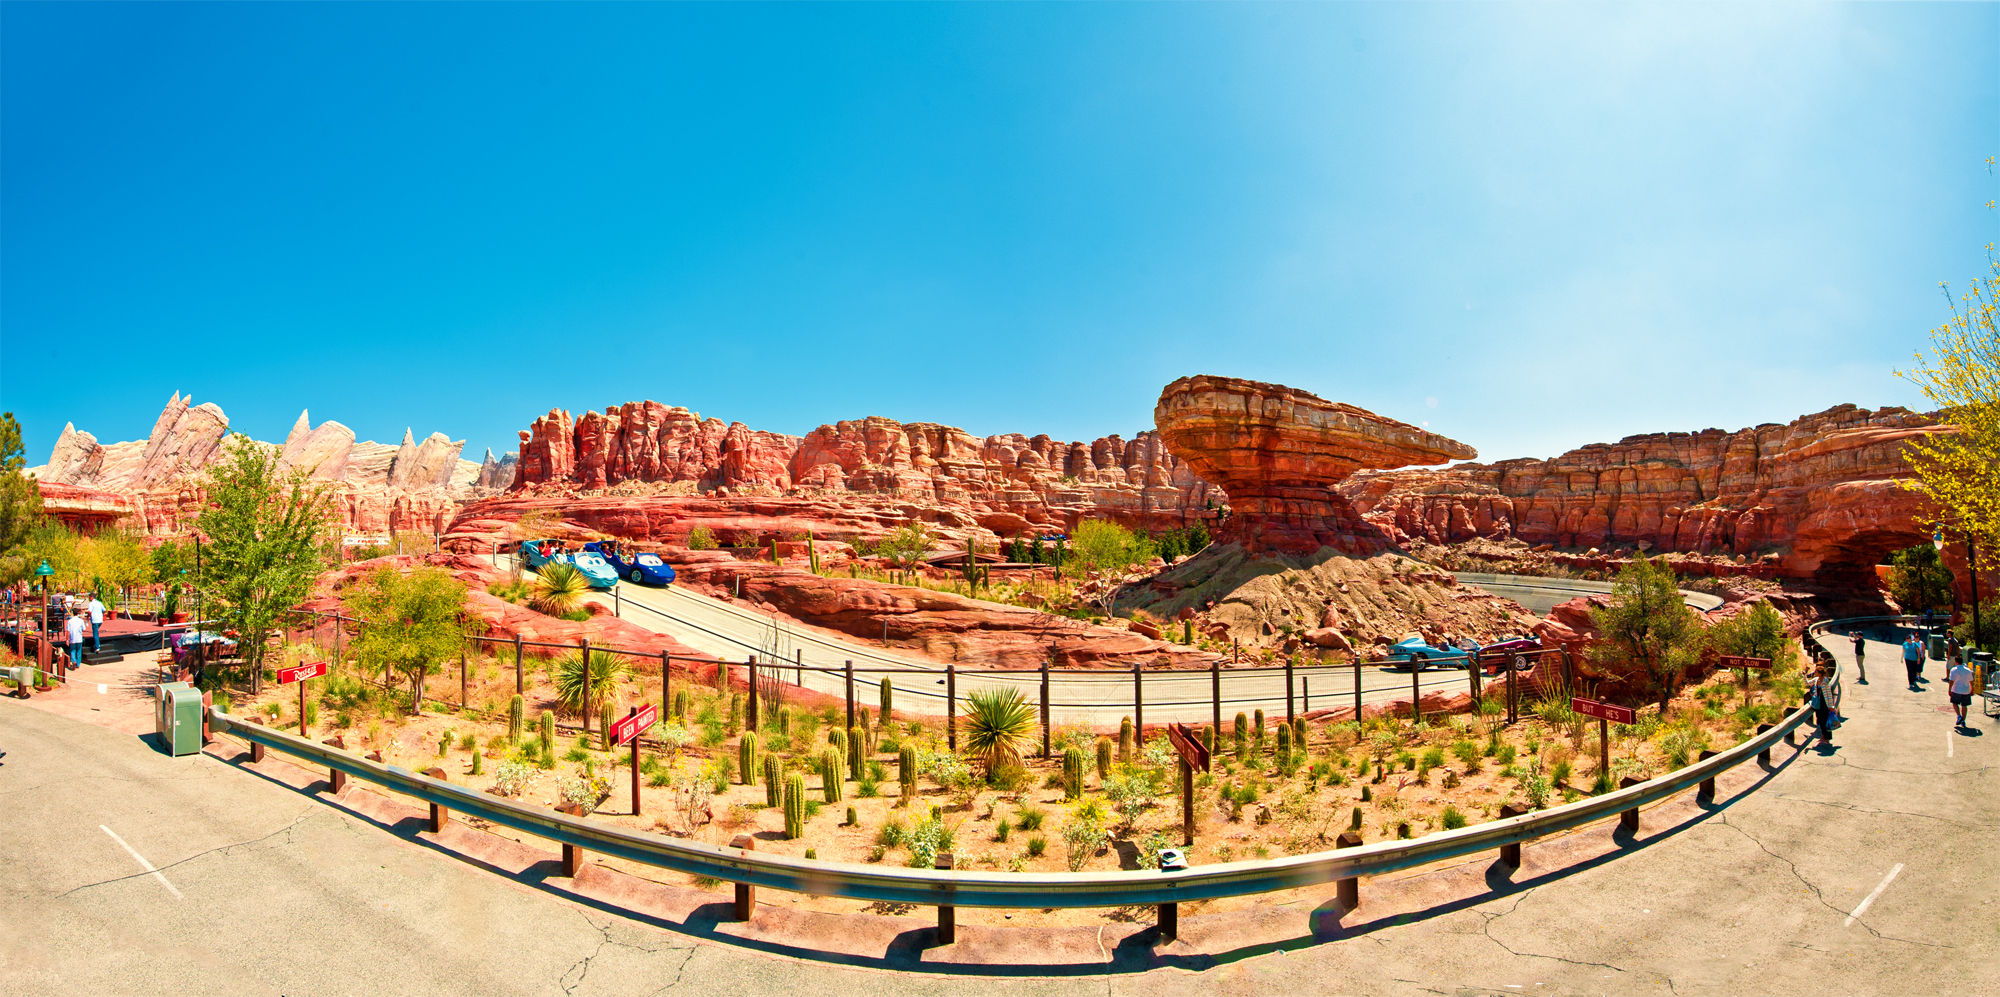 Ride review - Radiator Springs Racers and Cars Land at Disney